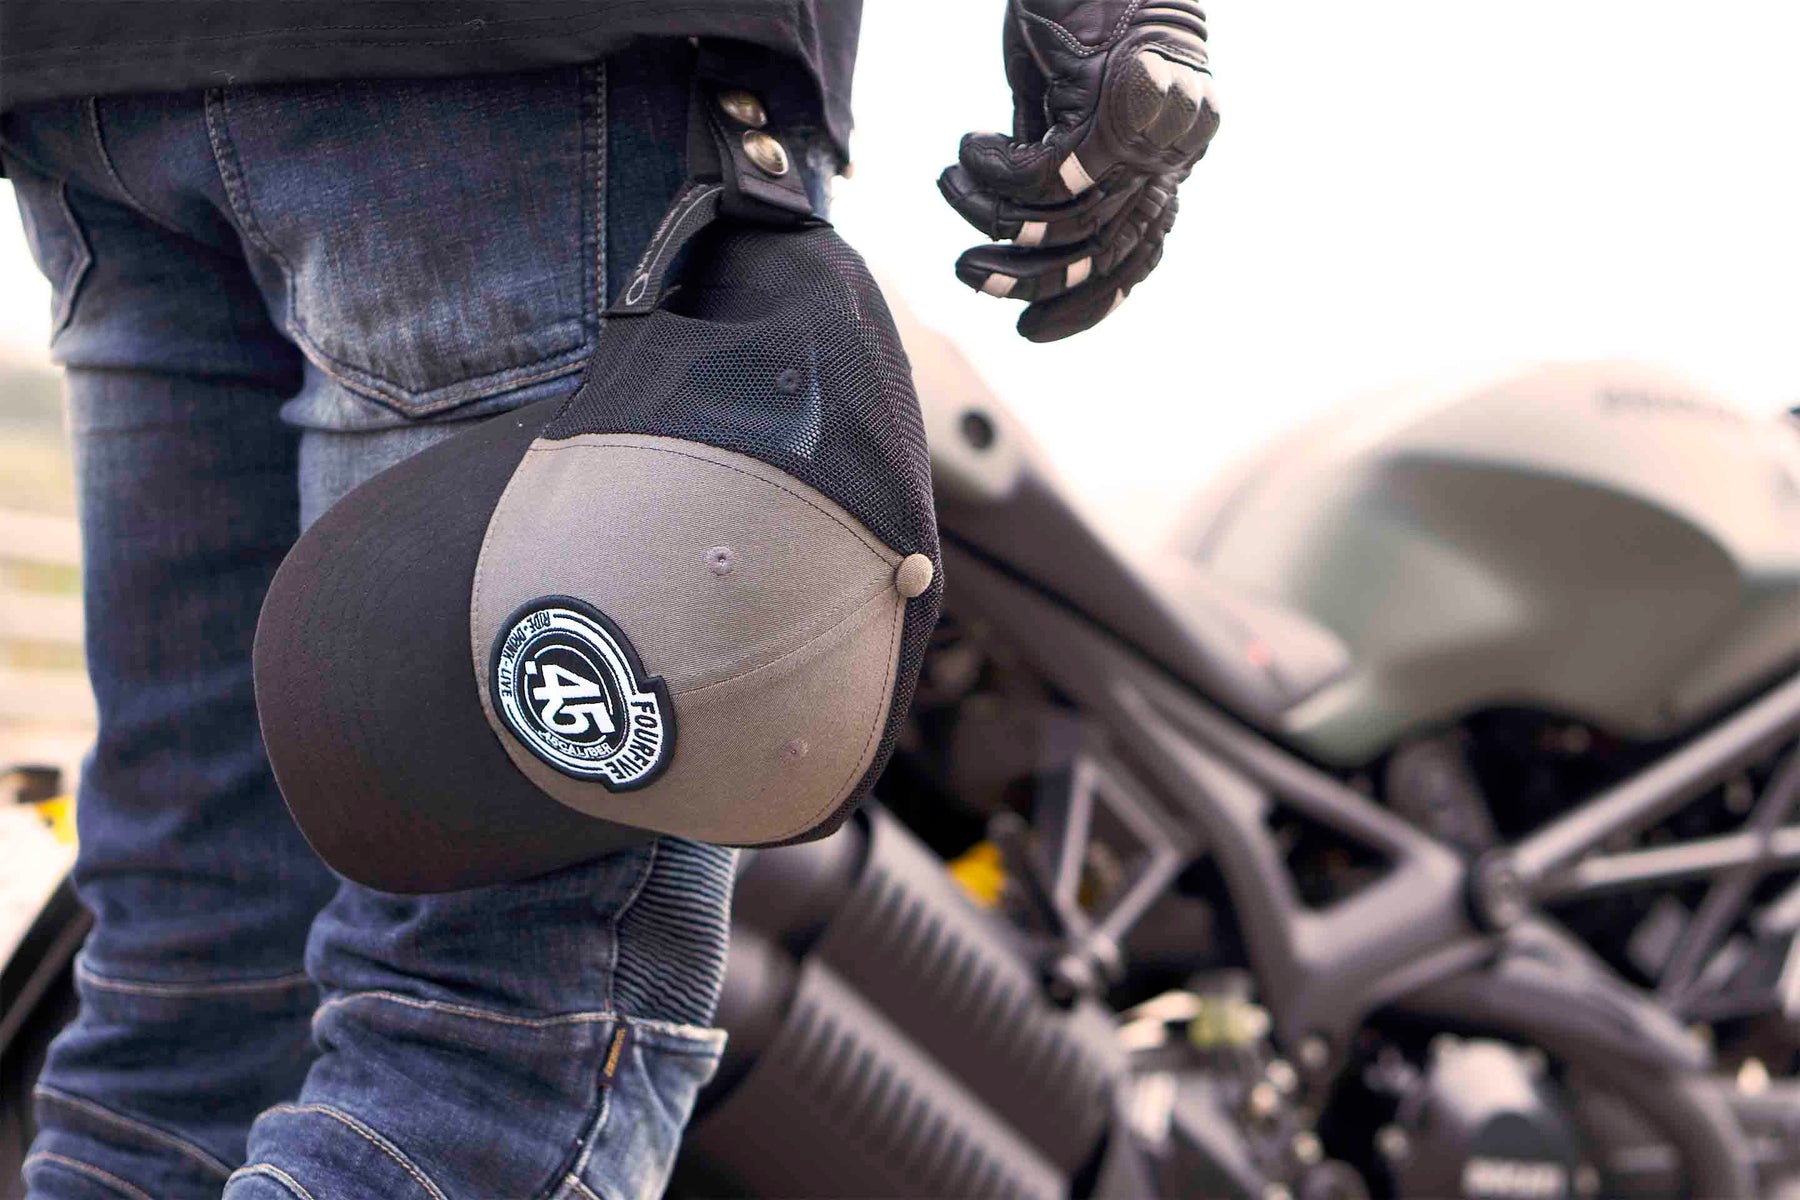 A Fourfive 45 grey and black Flat tracker trucker snap back hat holstered to a Fourfive Hat holster as rider walks towards a Ducati Monster in a dusk setting..